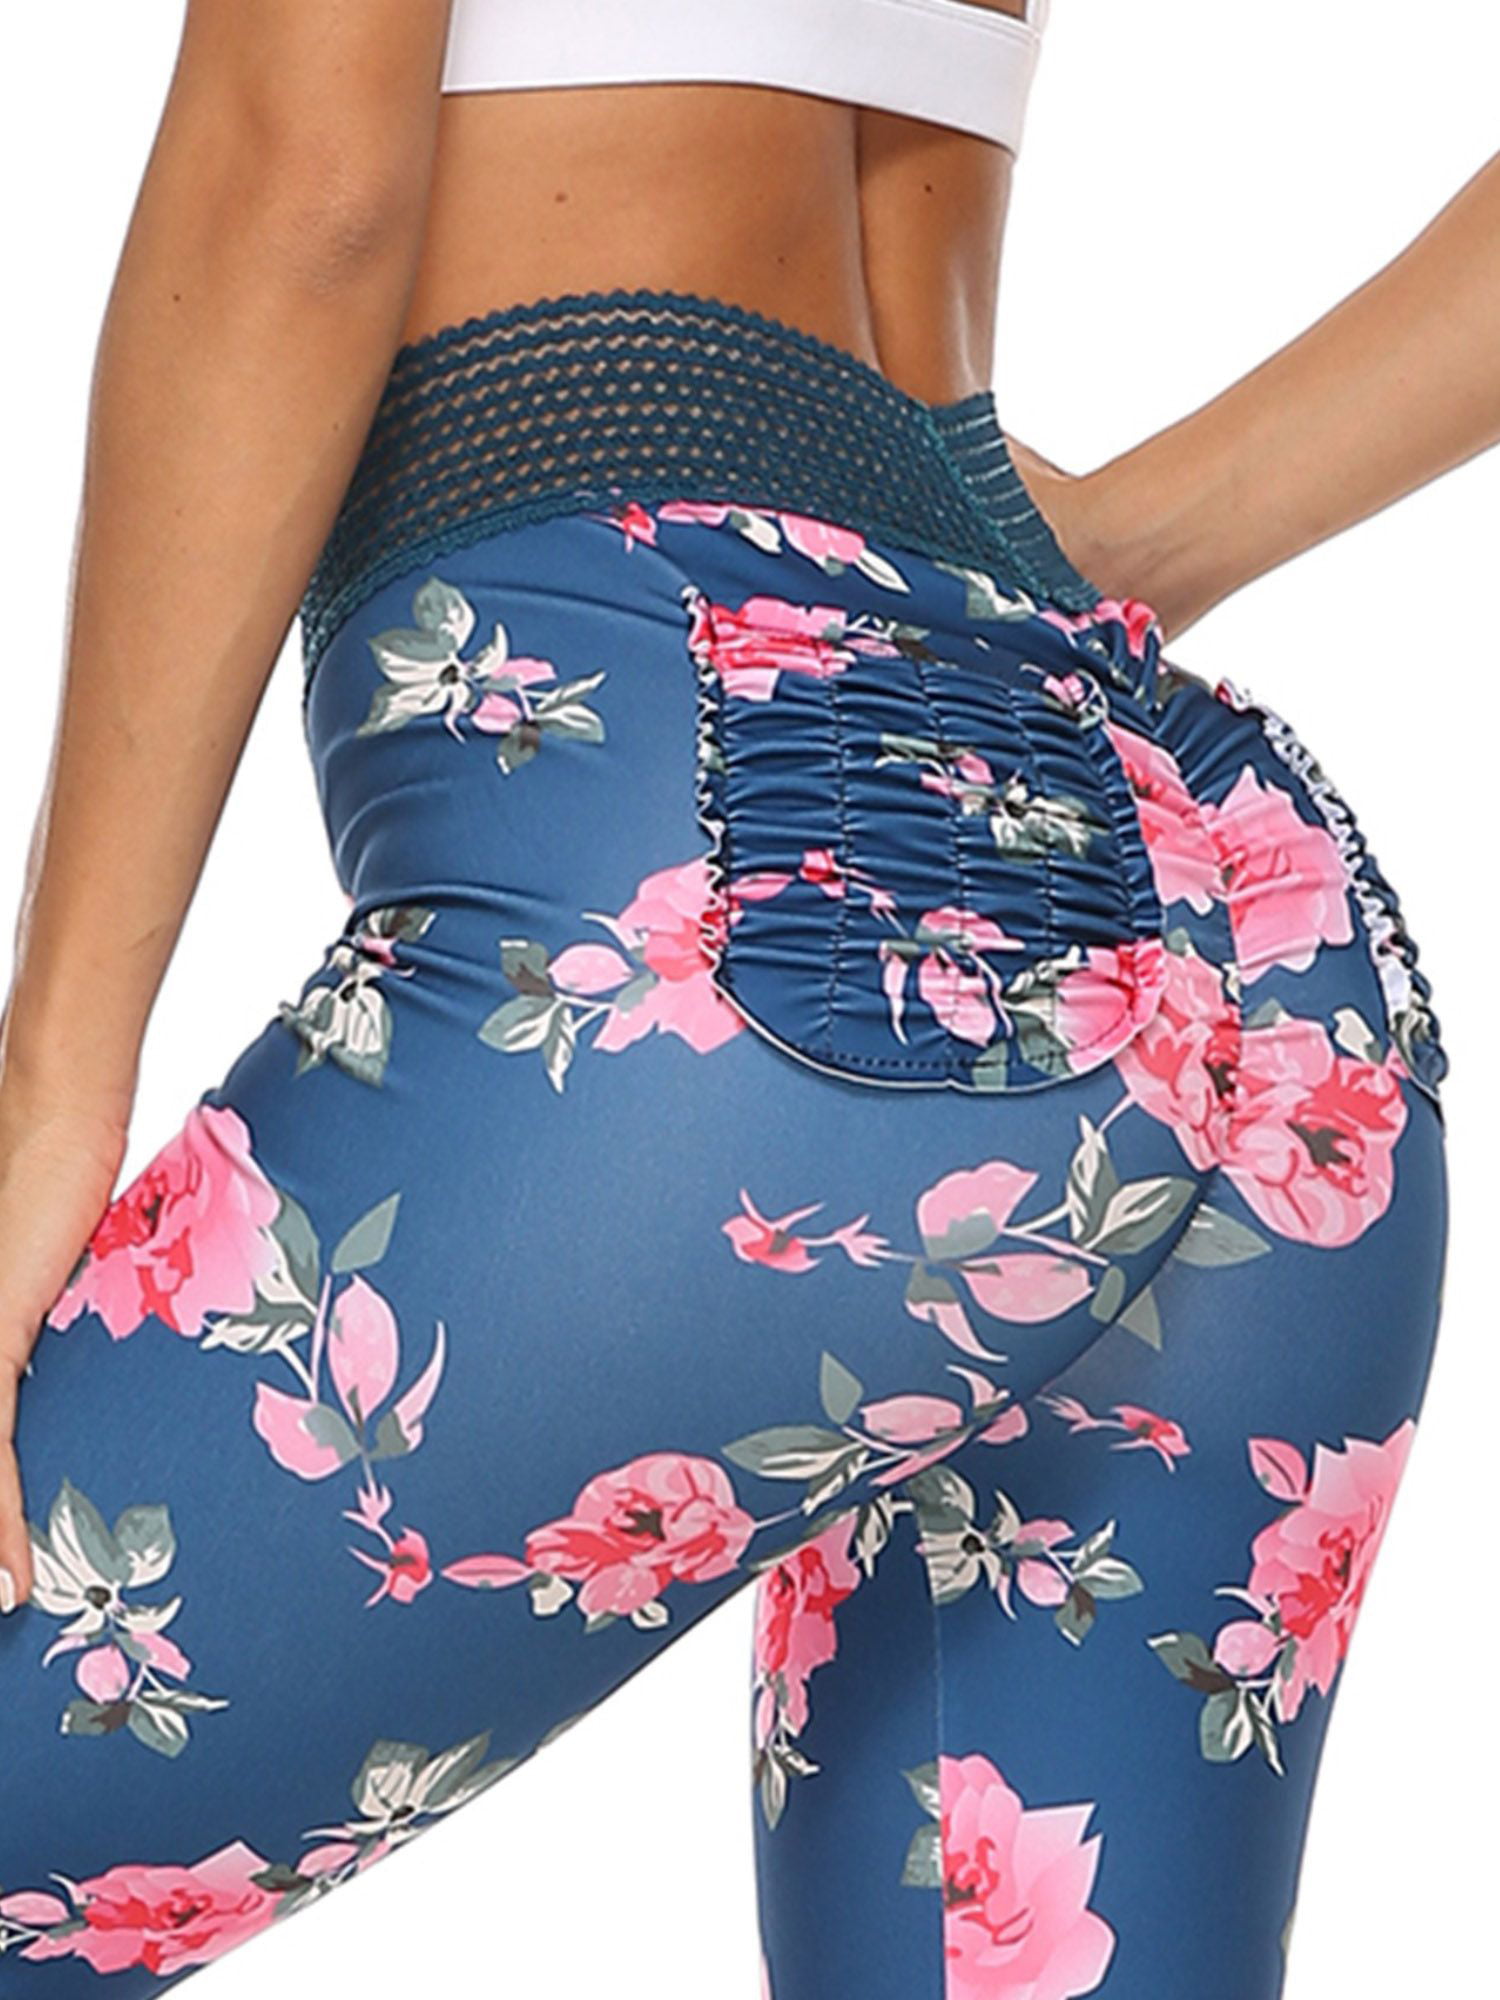 ❤Womens Butt Lift Floral Yoga Pants Gym Fitness Scrunch Ruched Leggings Trousers 